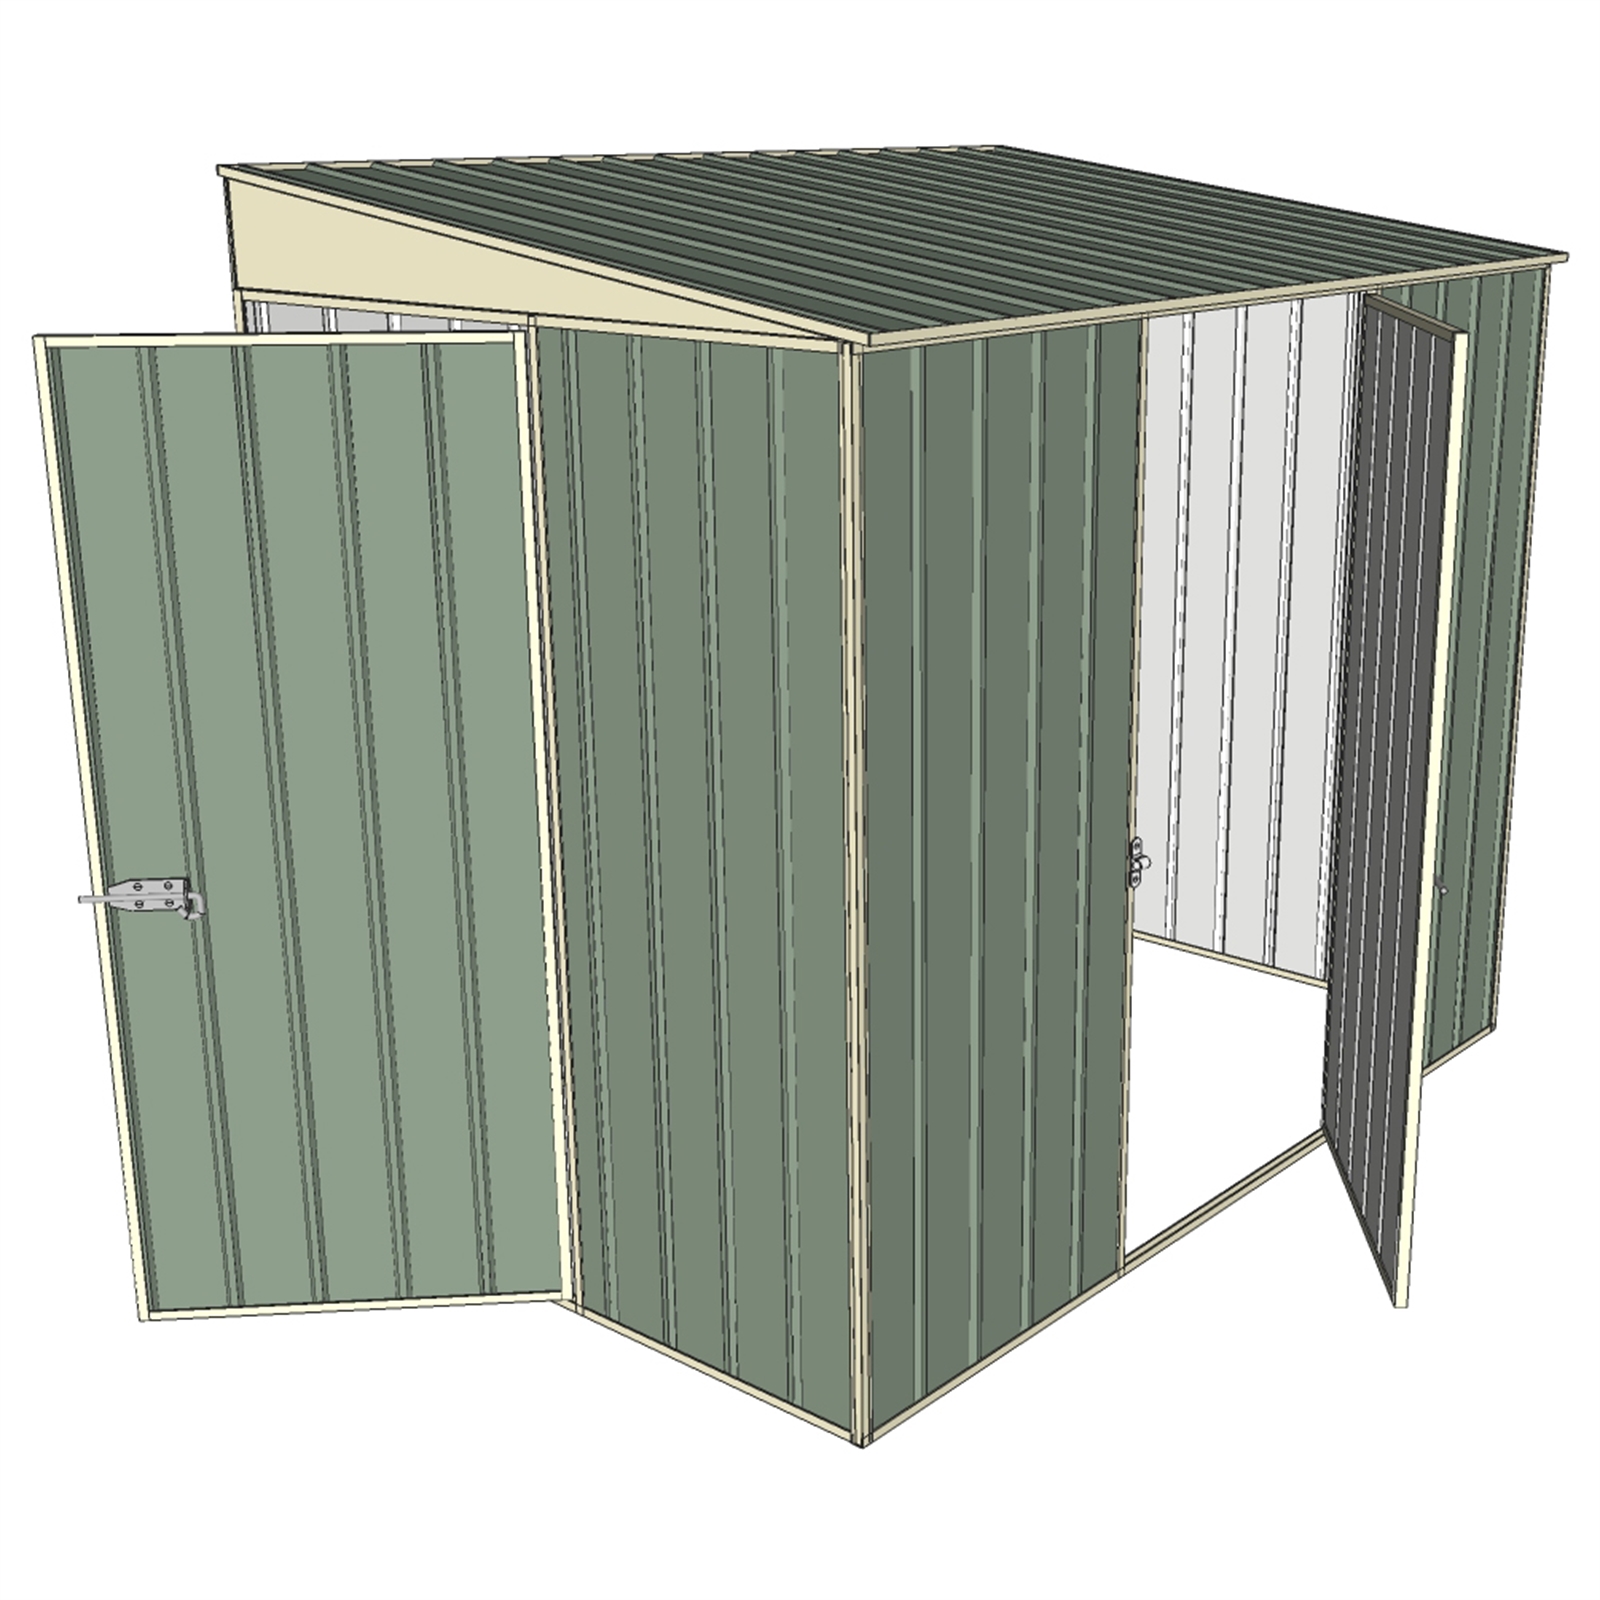 Build-a-Shed 2.3 x 1.5m Green Skillion Two Single Hinged Doors Narrow Shed